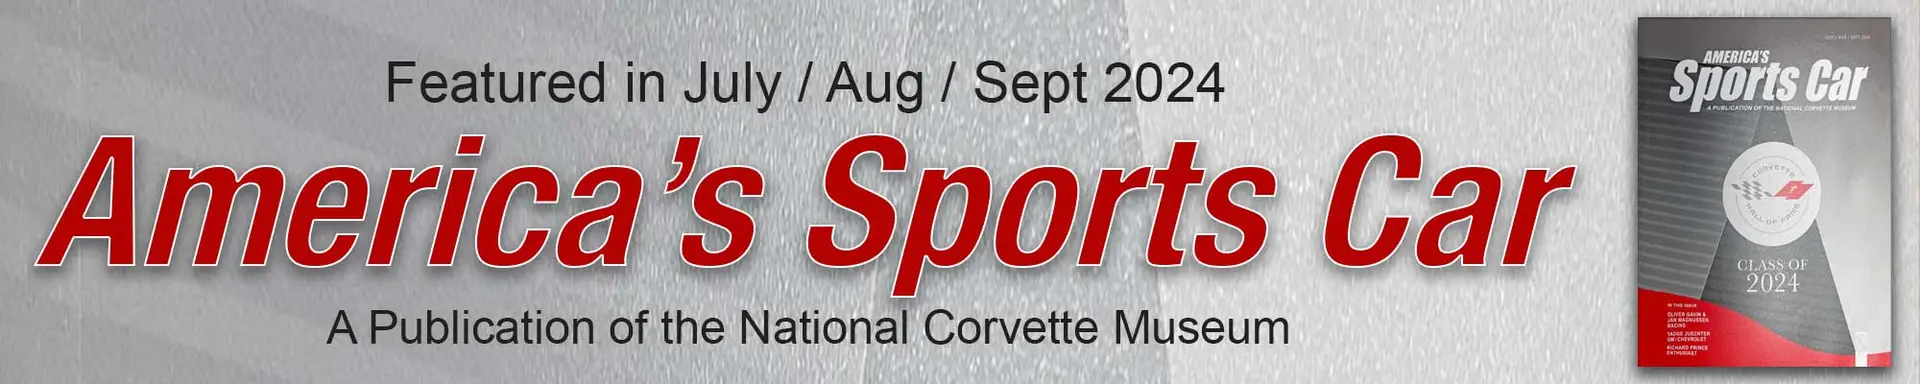 America's Sports Car Magazine by the National Corvette Museum